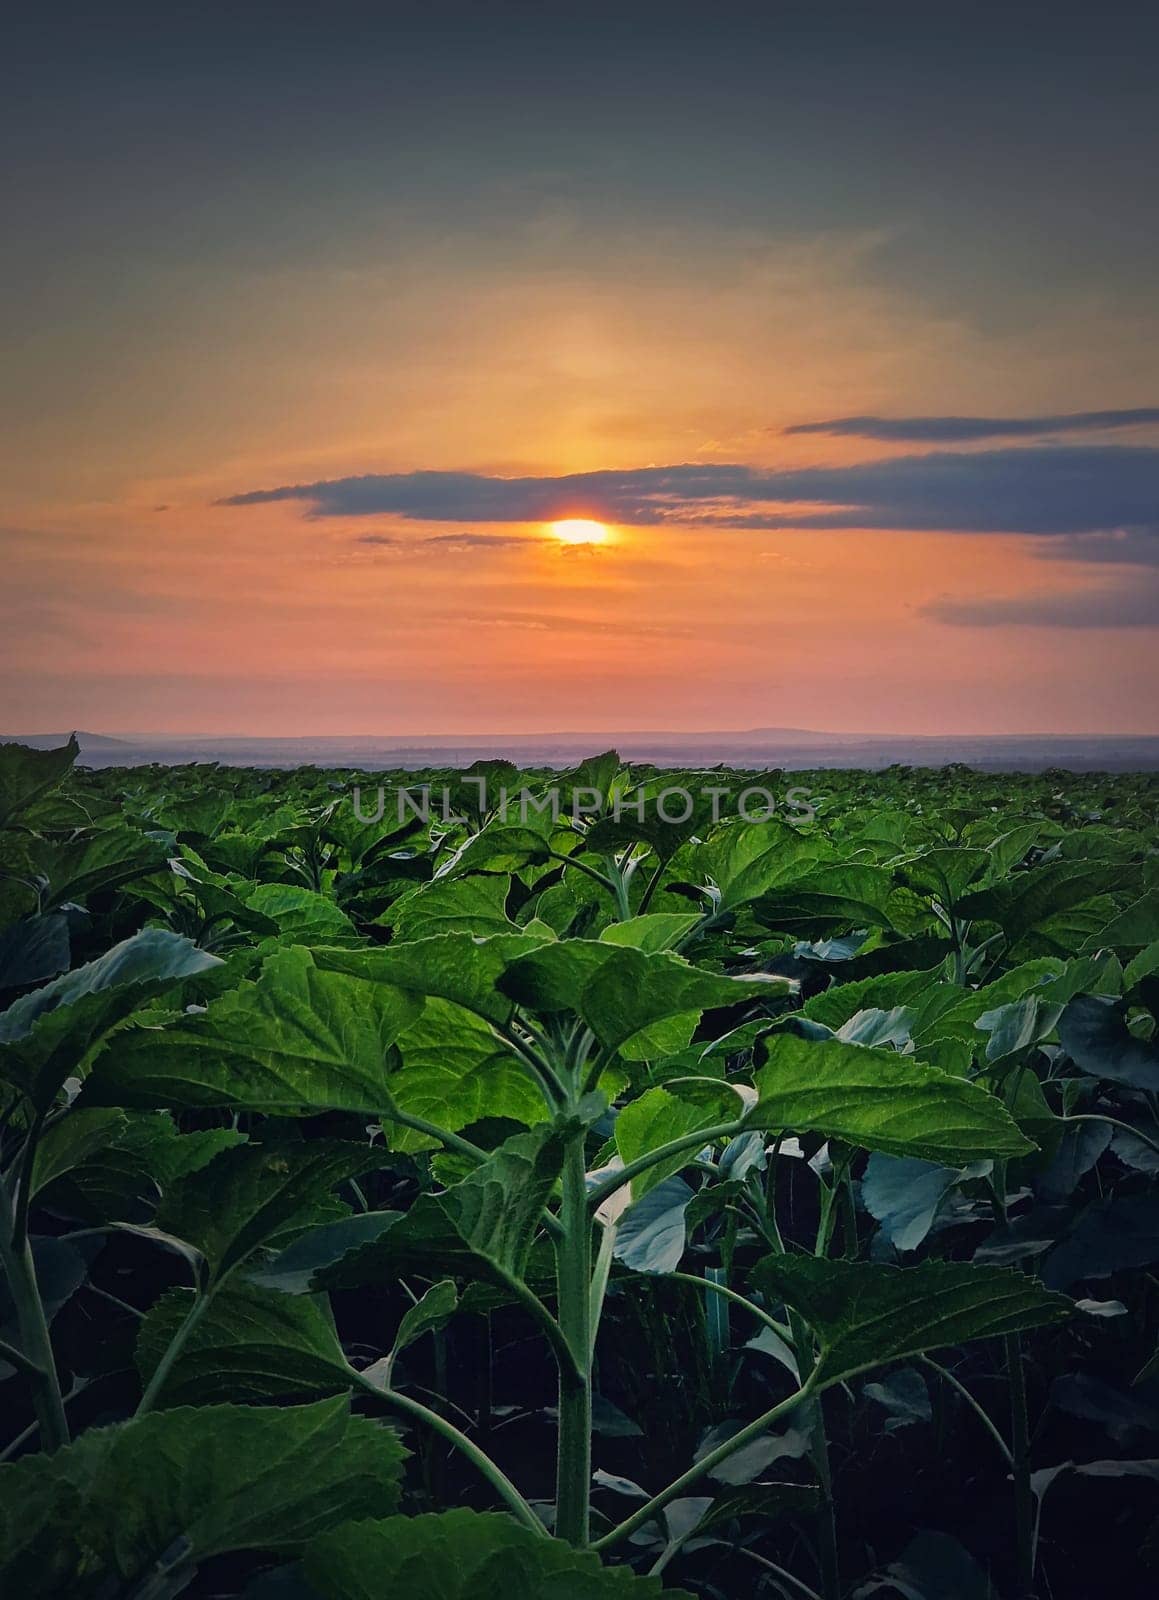 Growing sunflower plants in the field over sunset sky background, vertical scene
